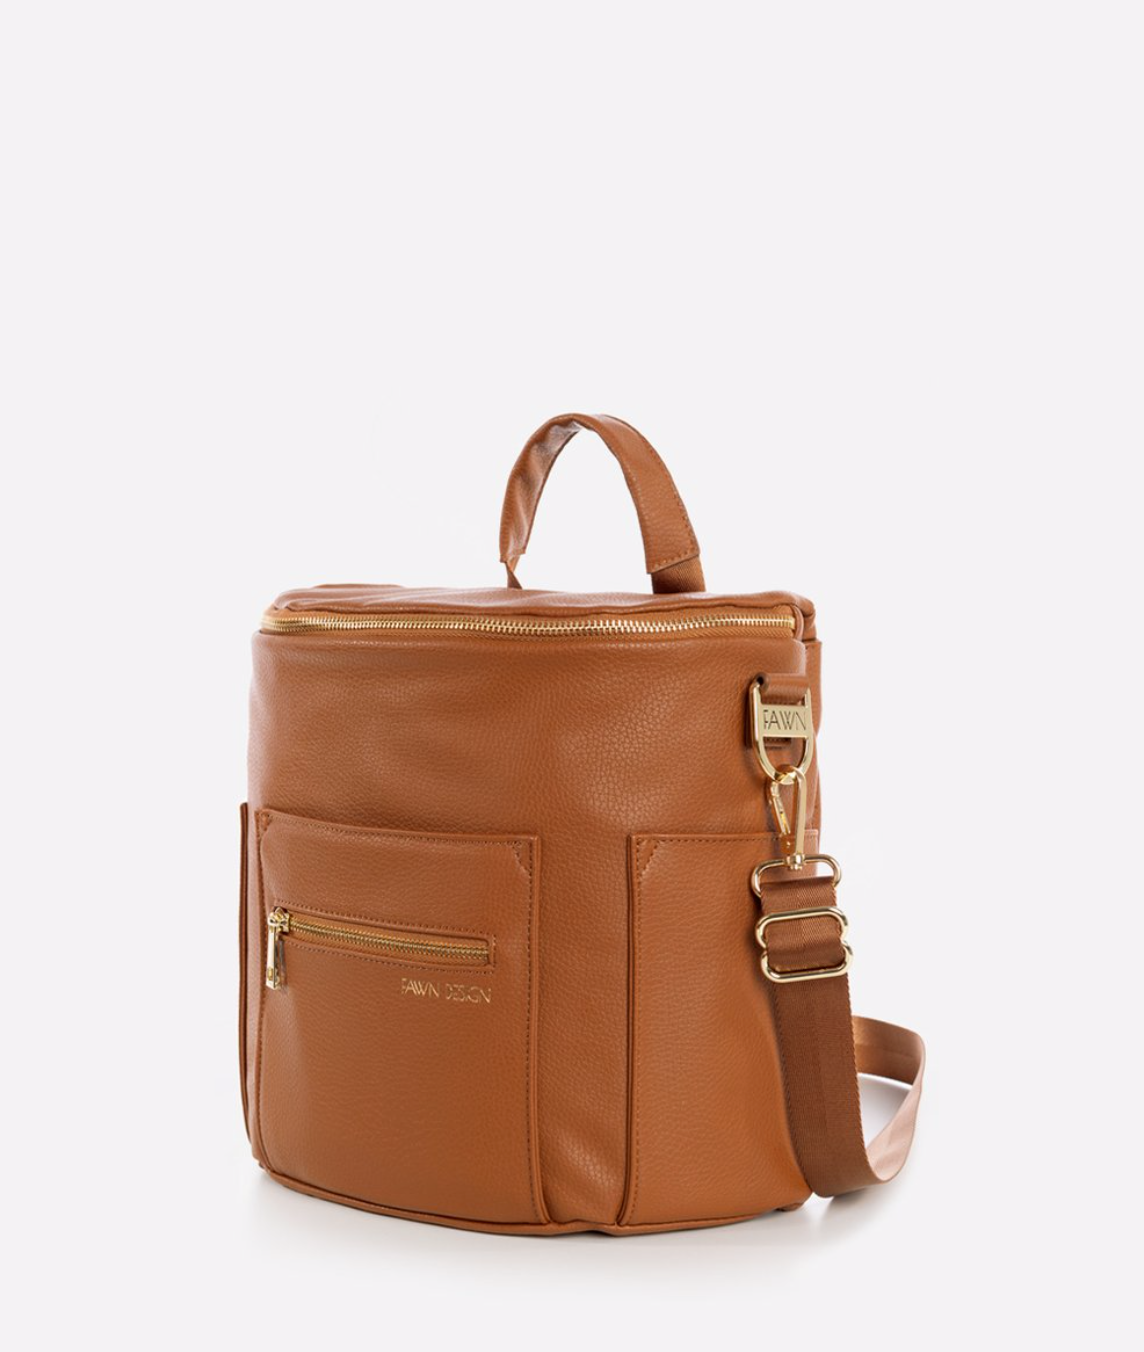 FAWN DESIGN THE ORIGINAL BAG - BROWN – Sincerely Yours